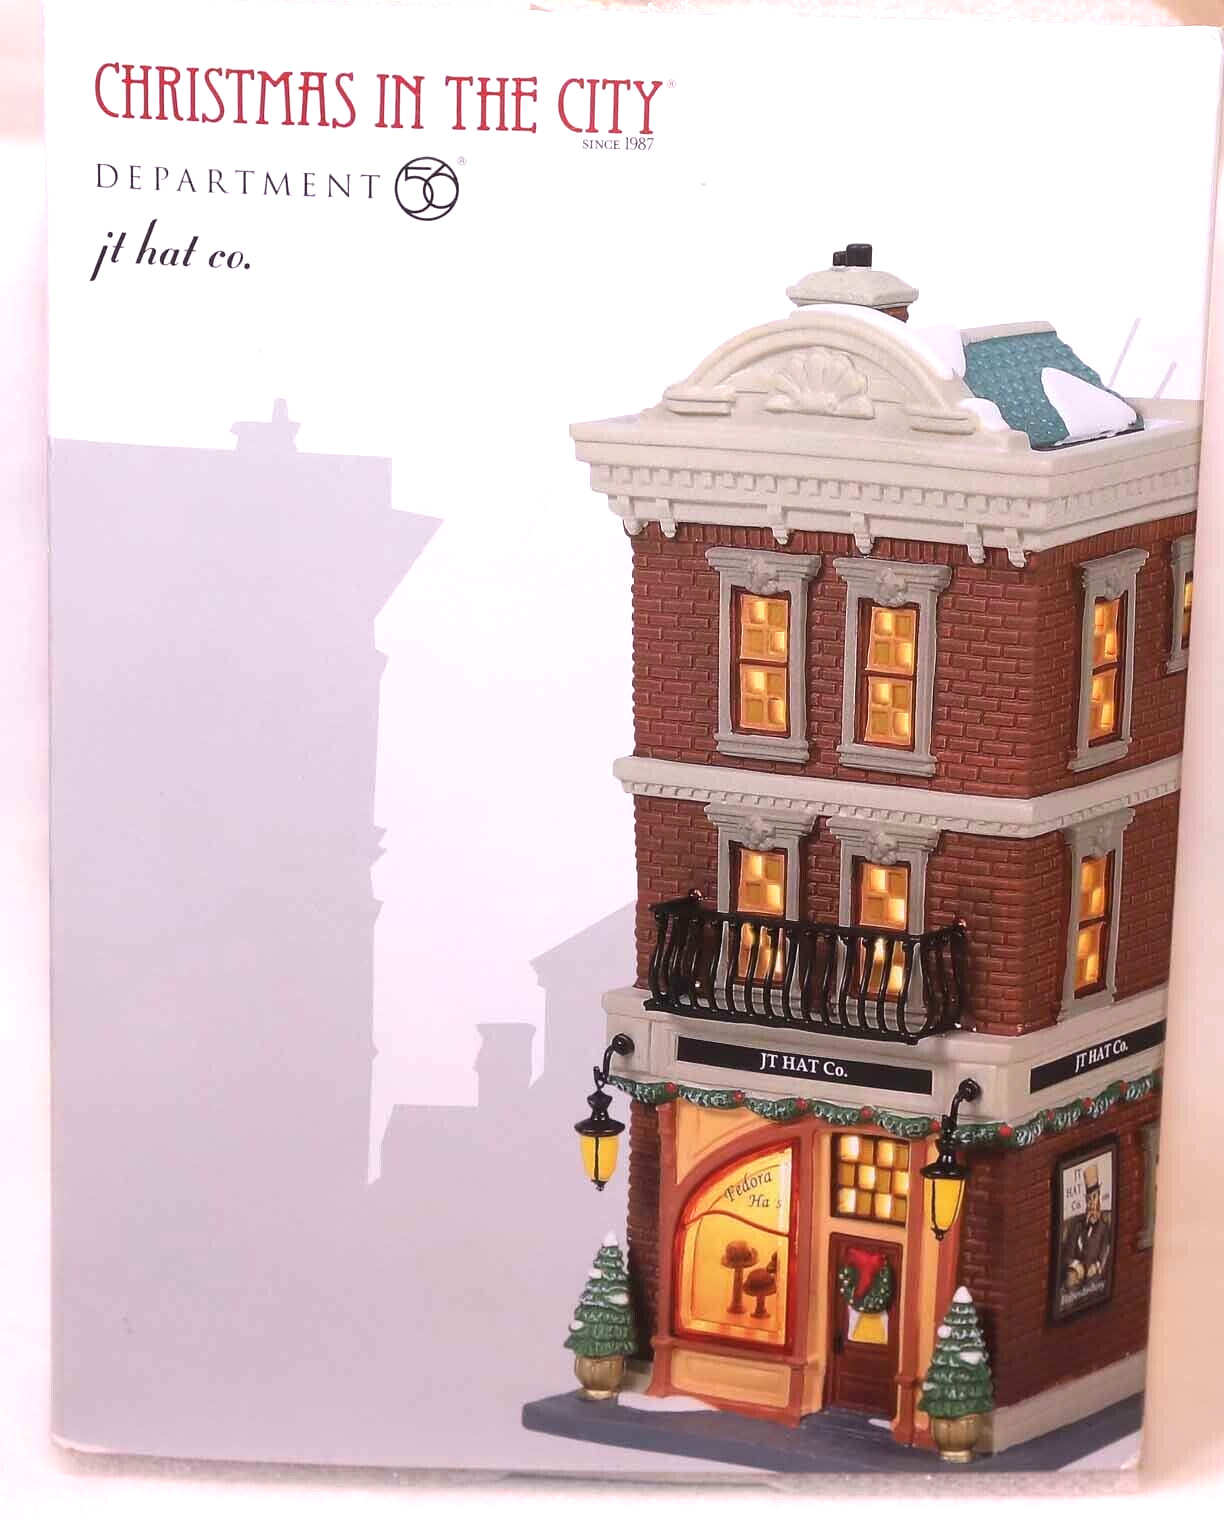 DEPT 56 JT HAT CO. 6005381 CHRISTMAS IN THE CITY CIC  VILLAGE